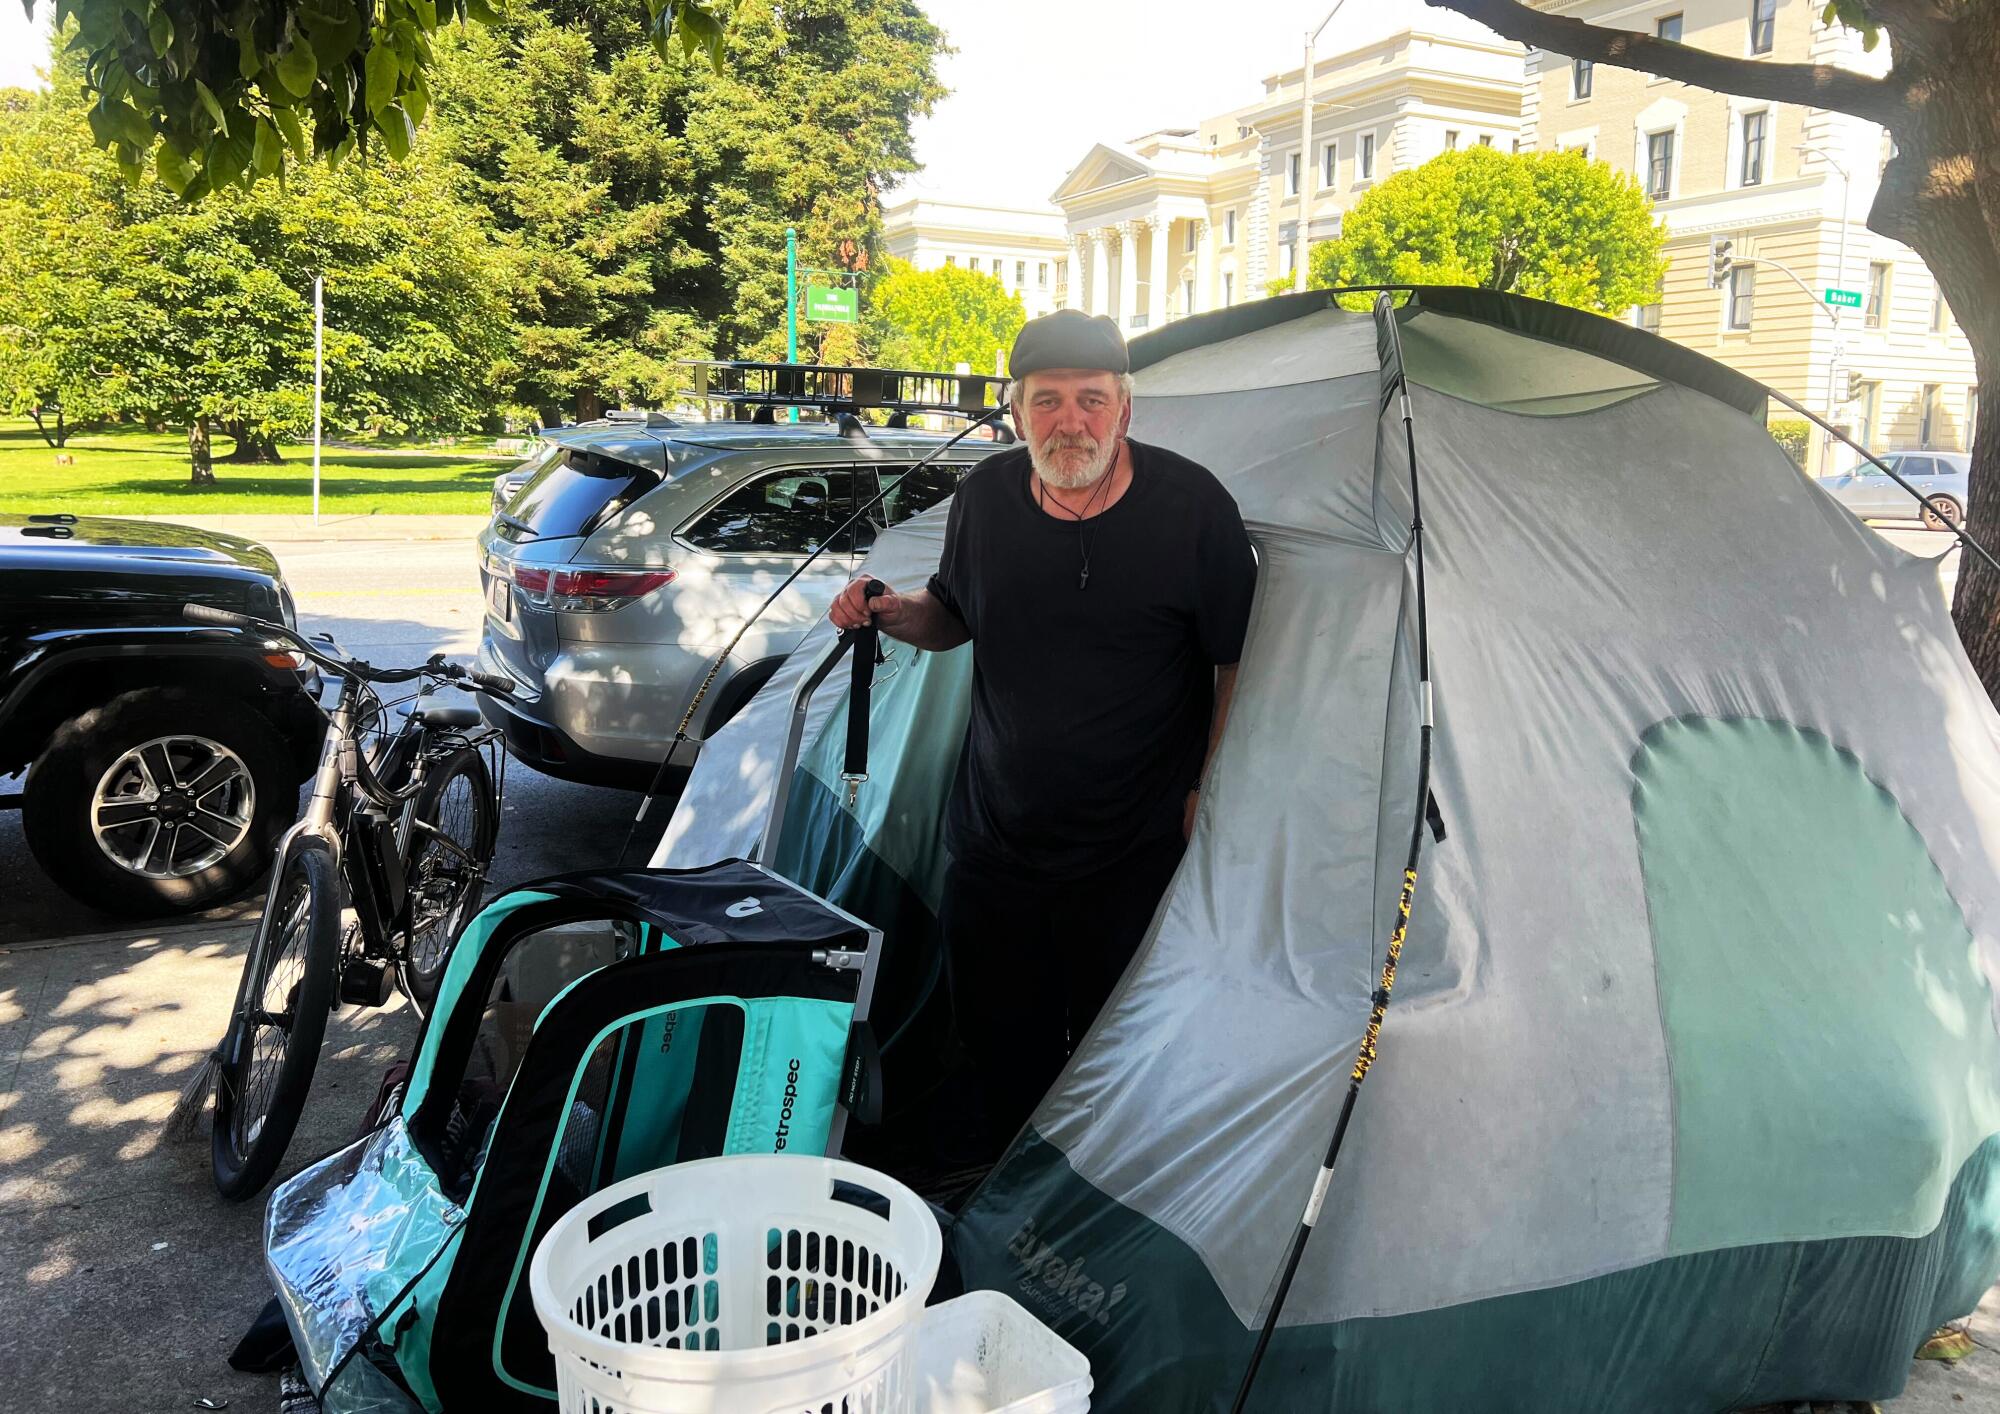 A man poses outside his tent pitched on a San Francisco sidewalk.